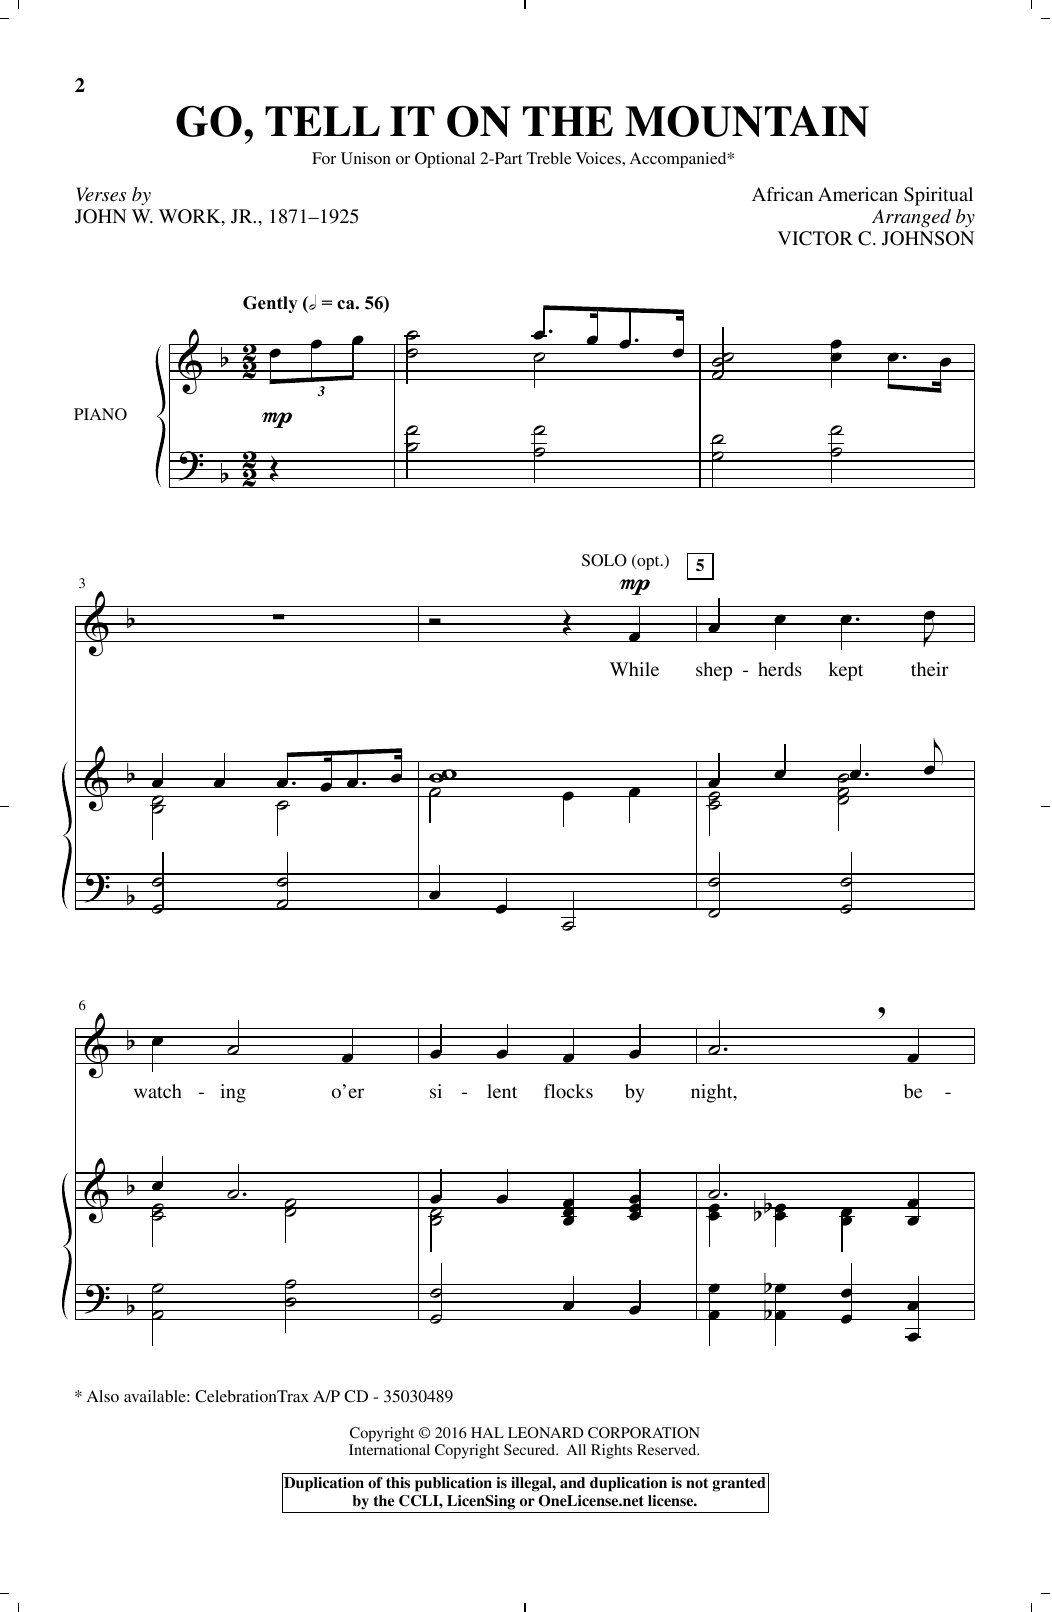 Download African-American Spiritual Go Tell It On The Mountain (arr. Victor Sheet Music